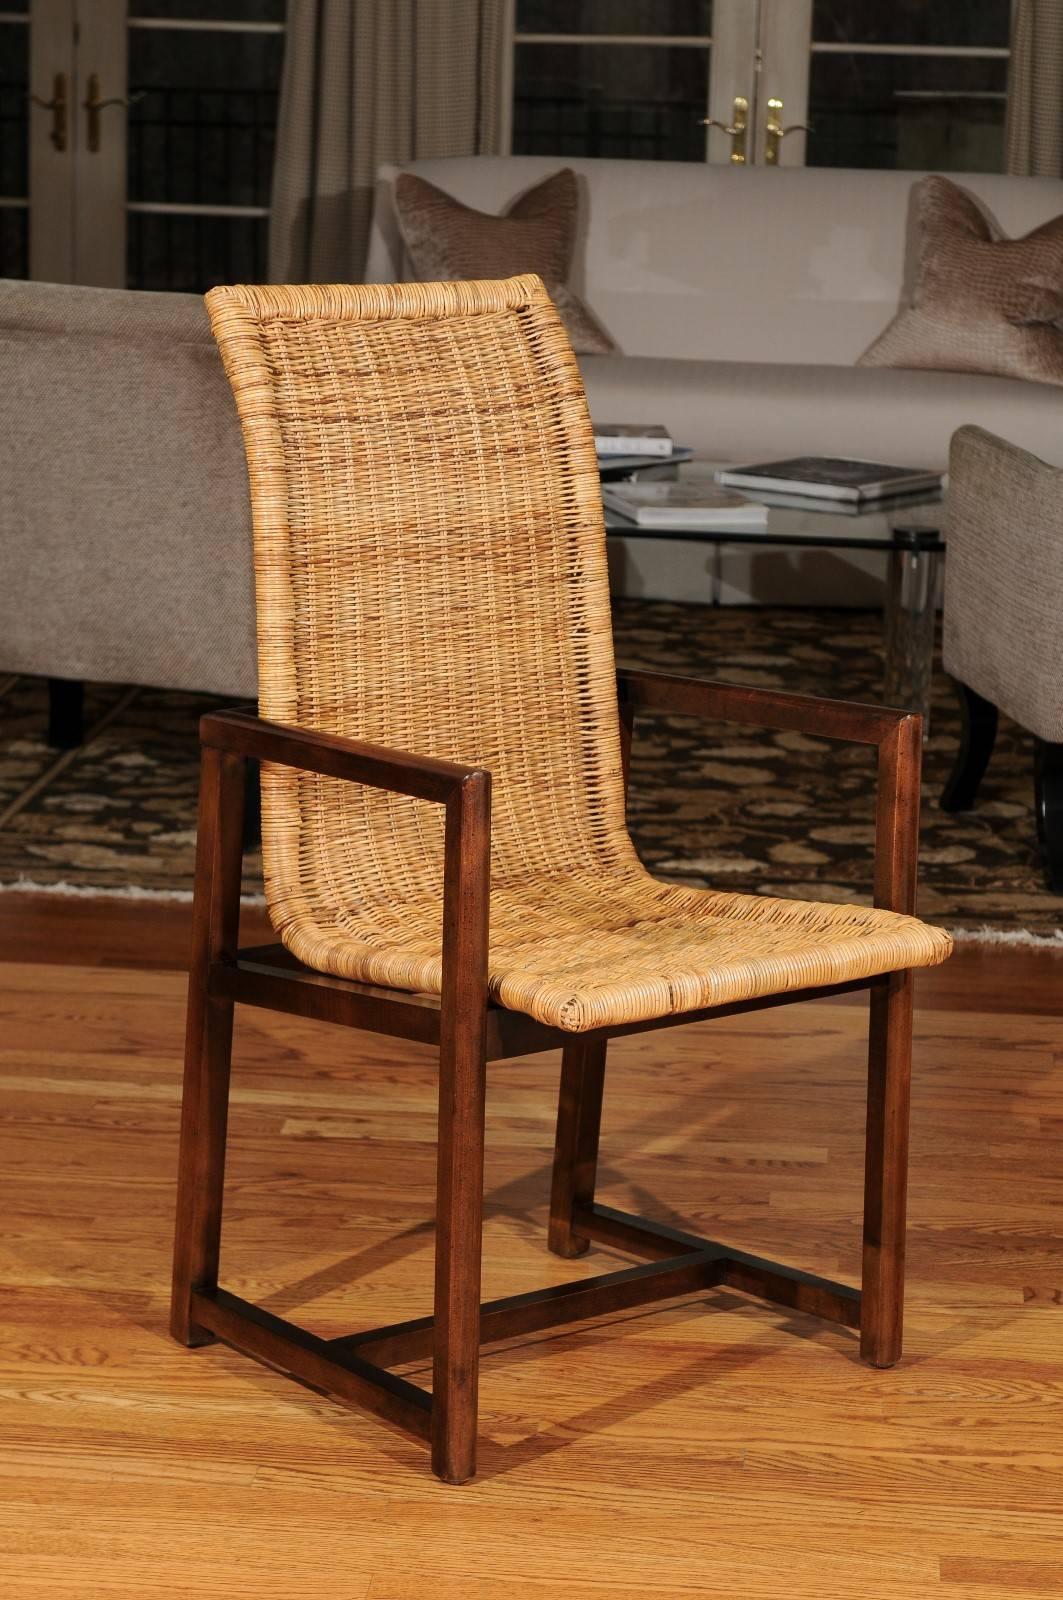 A beautiful set of vintage high-back dining chairs, circa 1980. Exceptionally crafted beech base finished in a walnut stain with a lovely woven wicker seat. All chairs are matching arm. Fabulous warmth and texture. Exquisite jewelry! Excellent